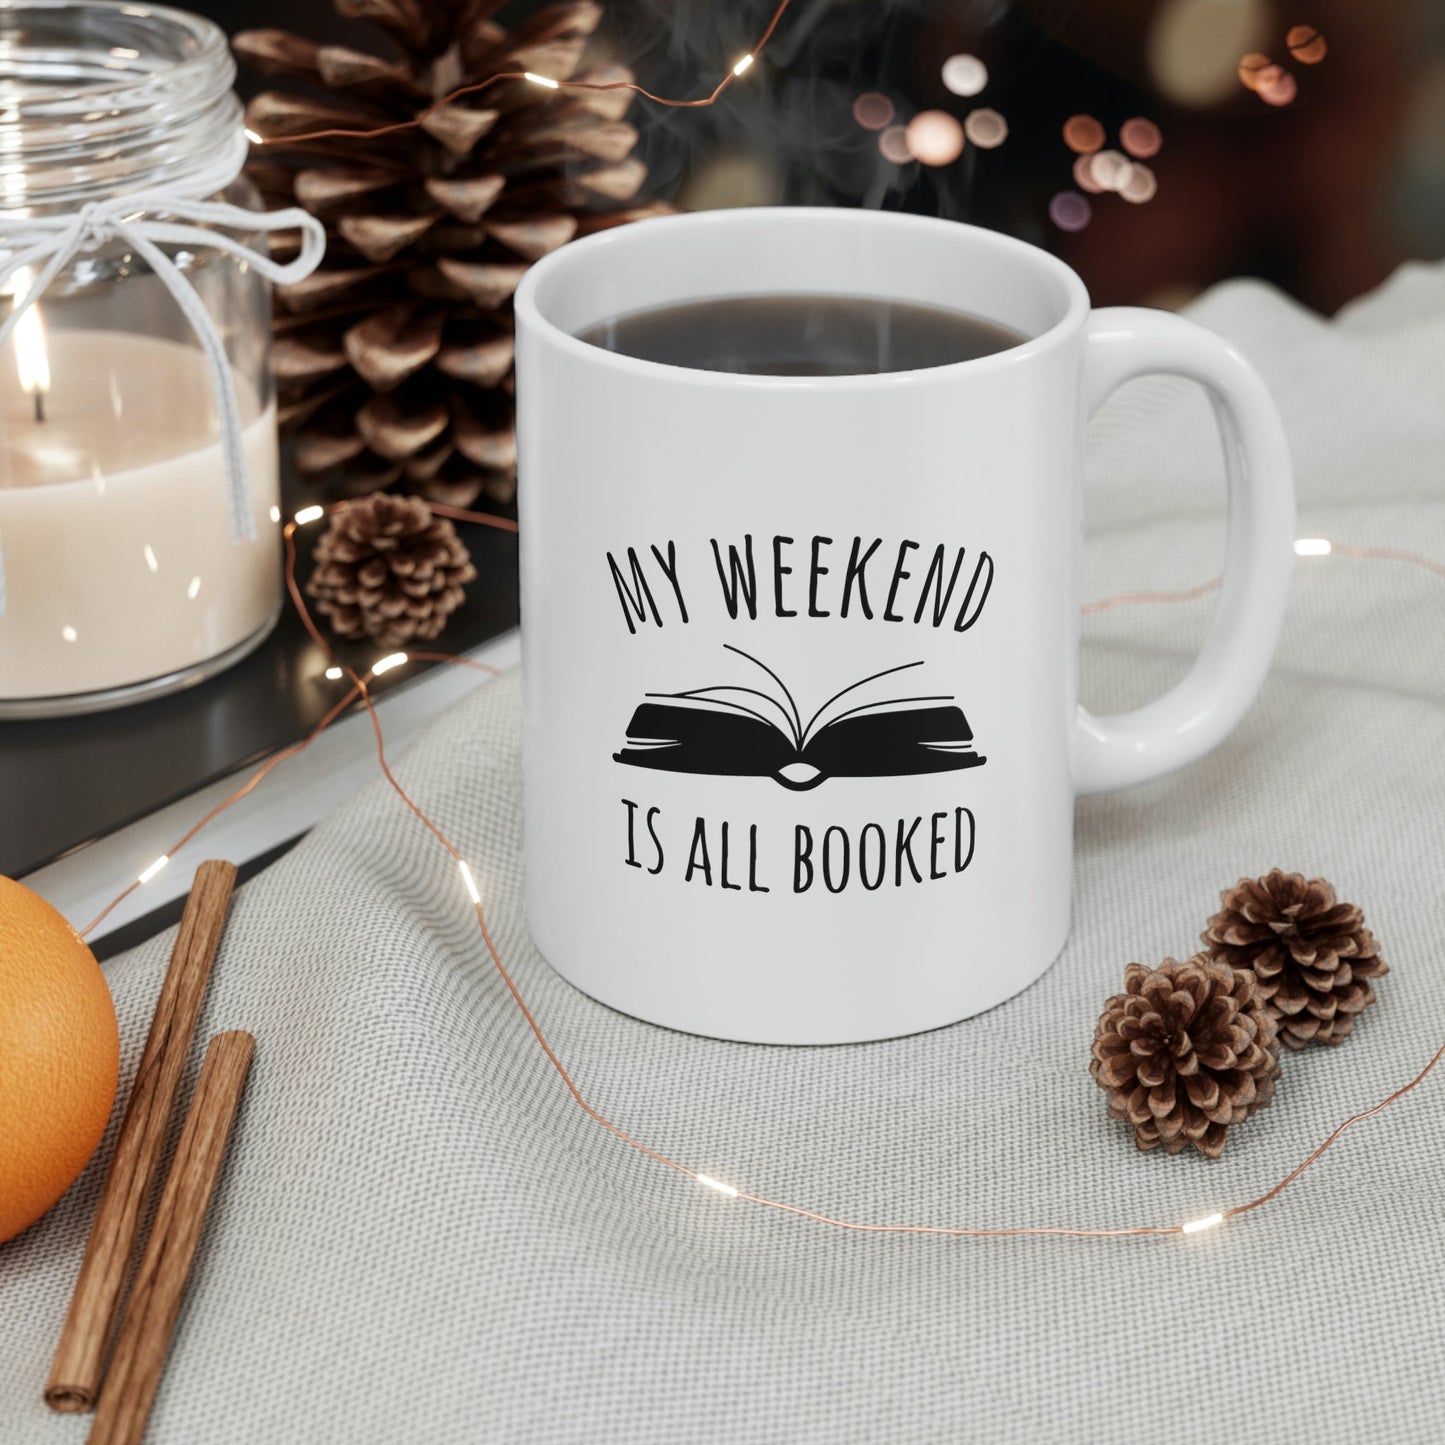 My Weekend Is All Booked Book Lovers Educational Quotes Ceramic Mug 11oz Ichaku [Perfect Gifts Selection]